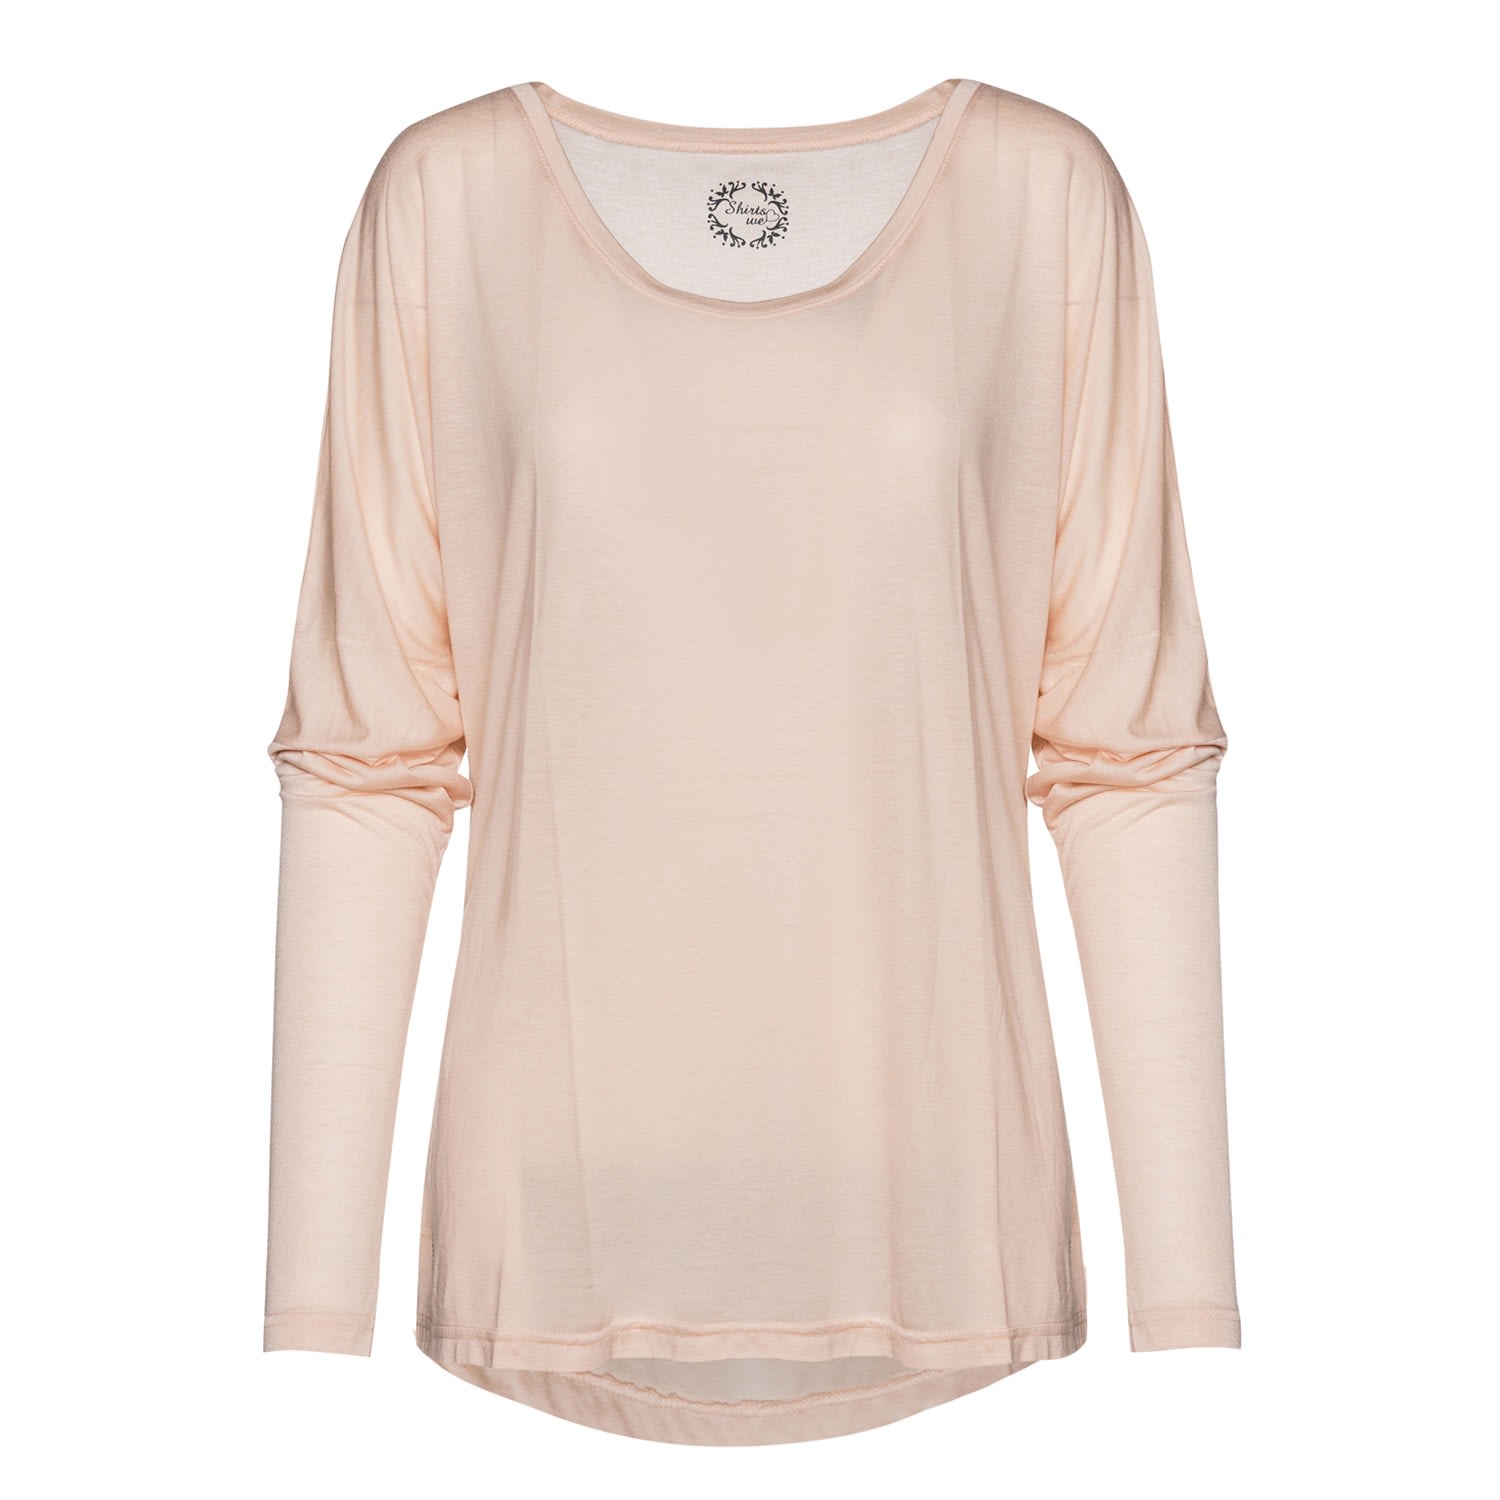 Women’s Rose Gold Light Pink Top With Batwing Sleeves Small Conquista